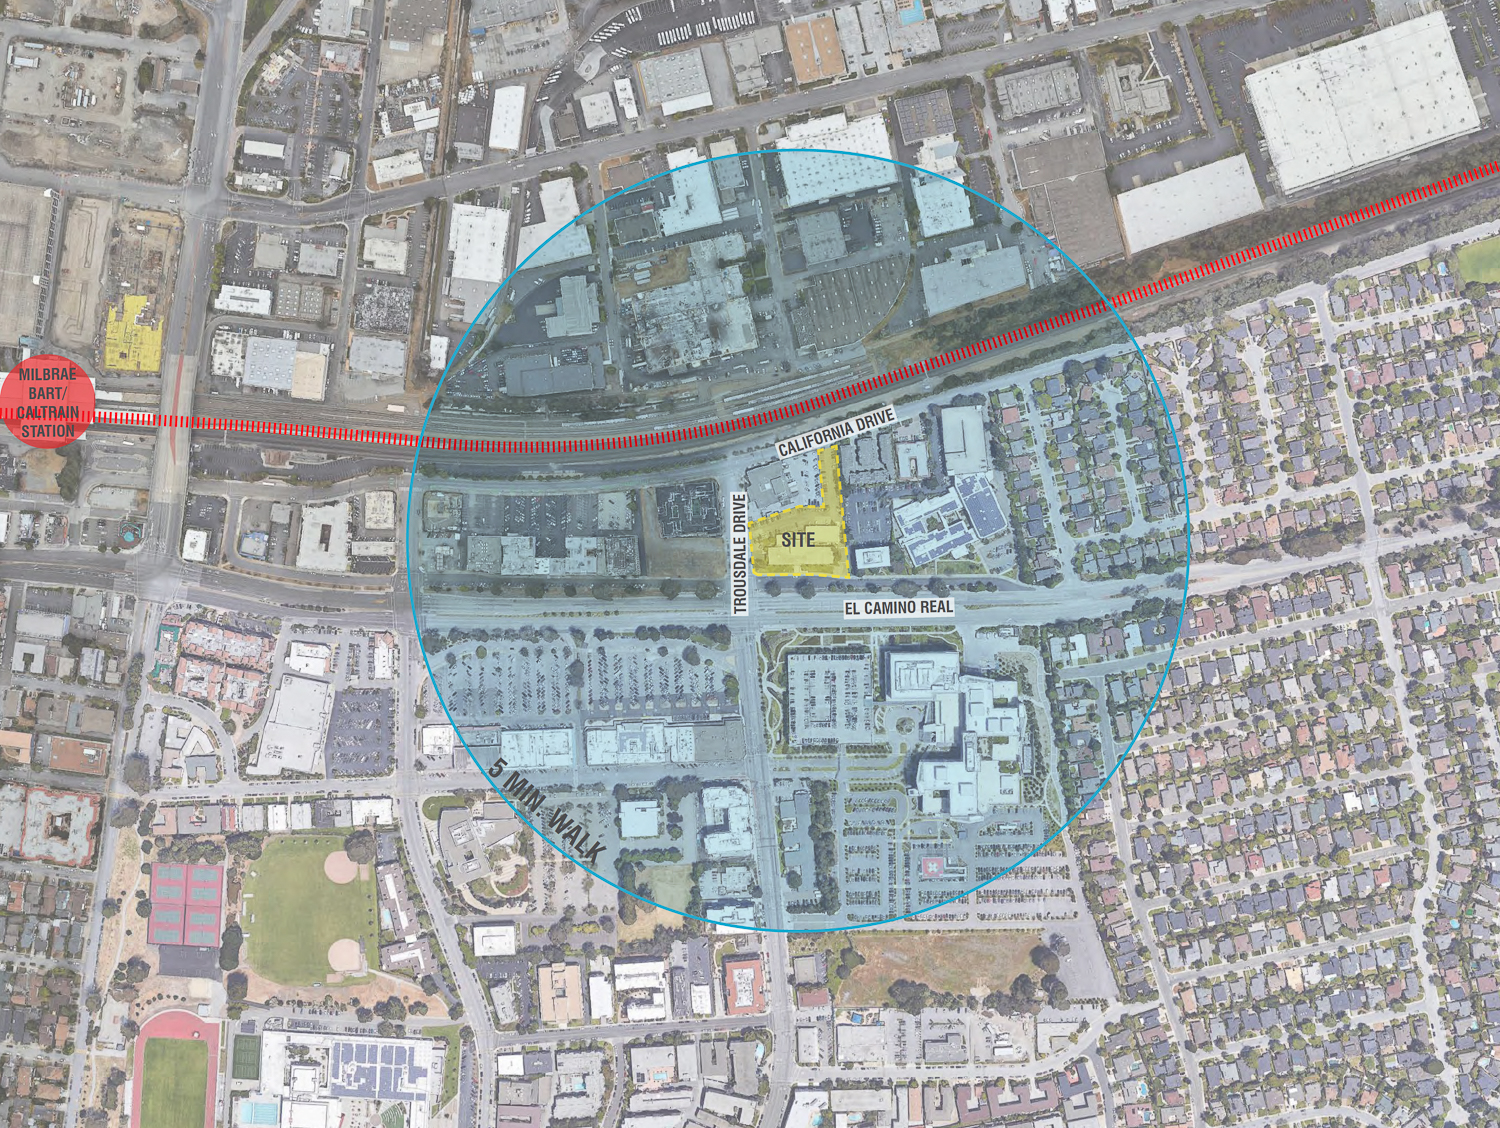 1766 El Camino Real and area context, image via planning documents